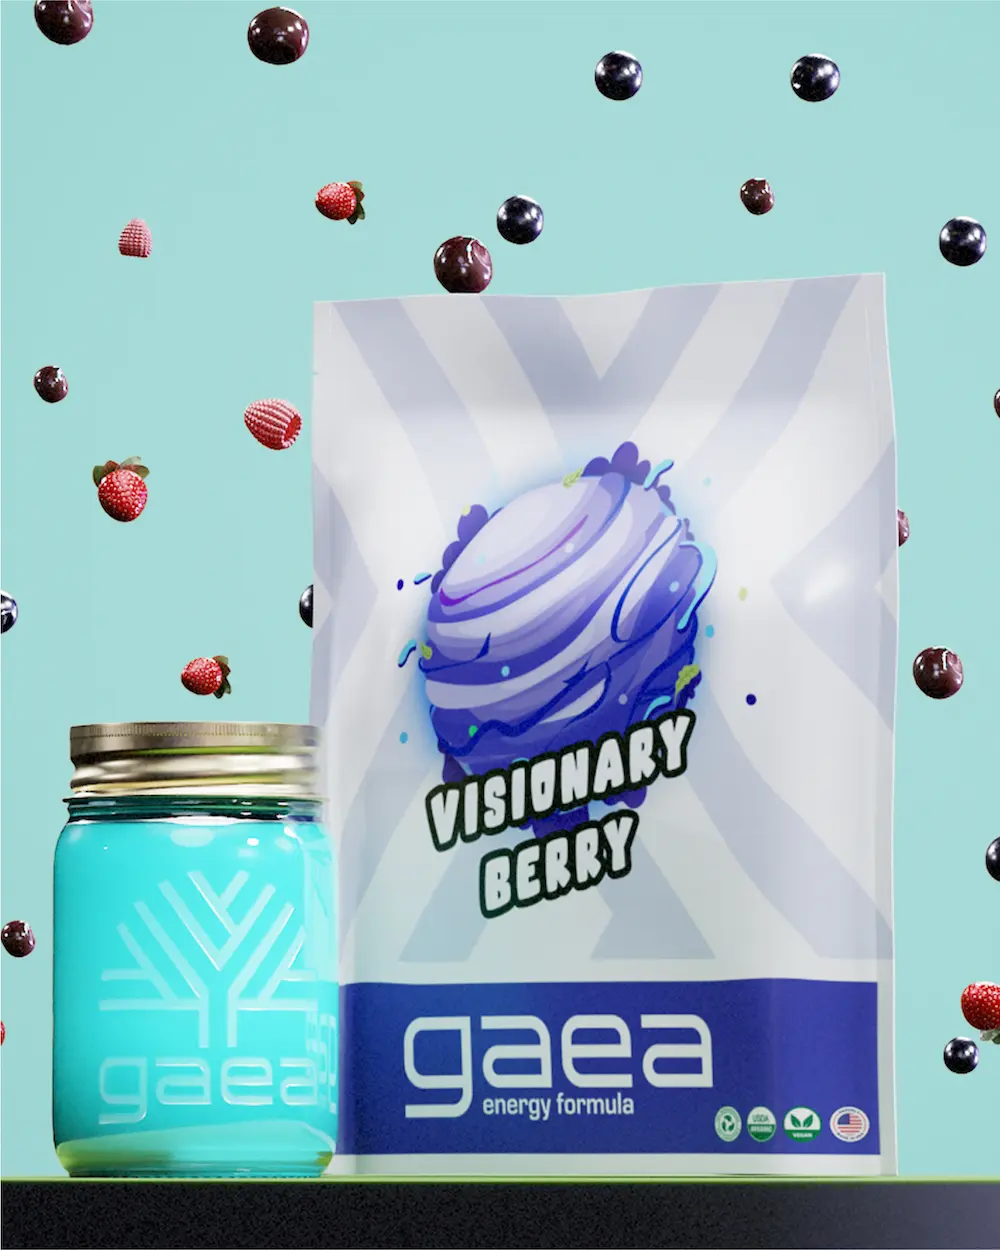 gaea visionary berry energy elixir. pictured in a mason jar and in the bag. blue background with blueberries and raspberries.